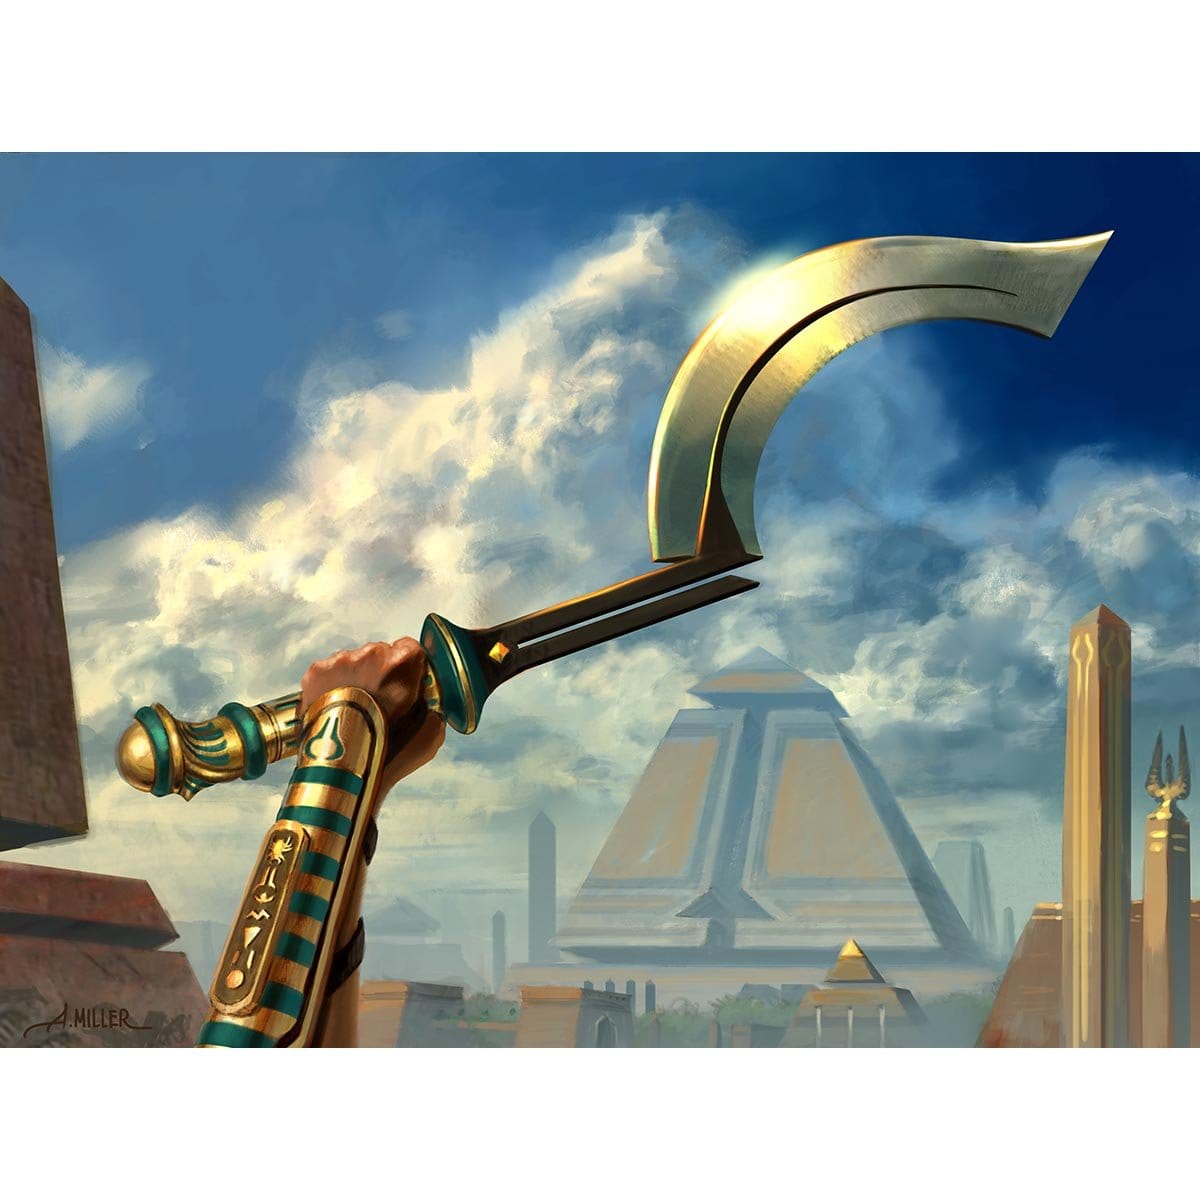 Honed Khopesh Print - Print - Original Magic Art - Accessories for Magic the Gathering and other card games